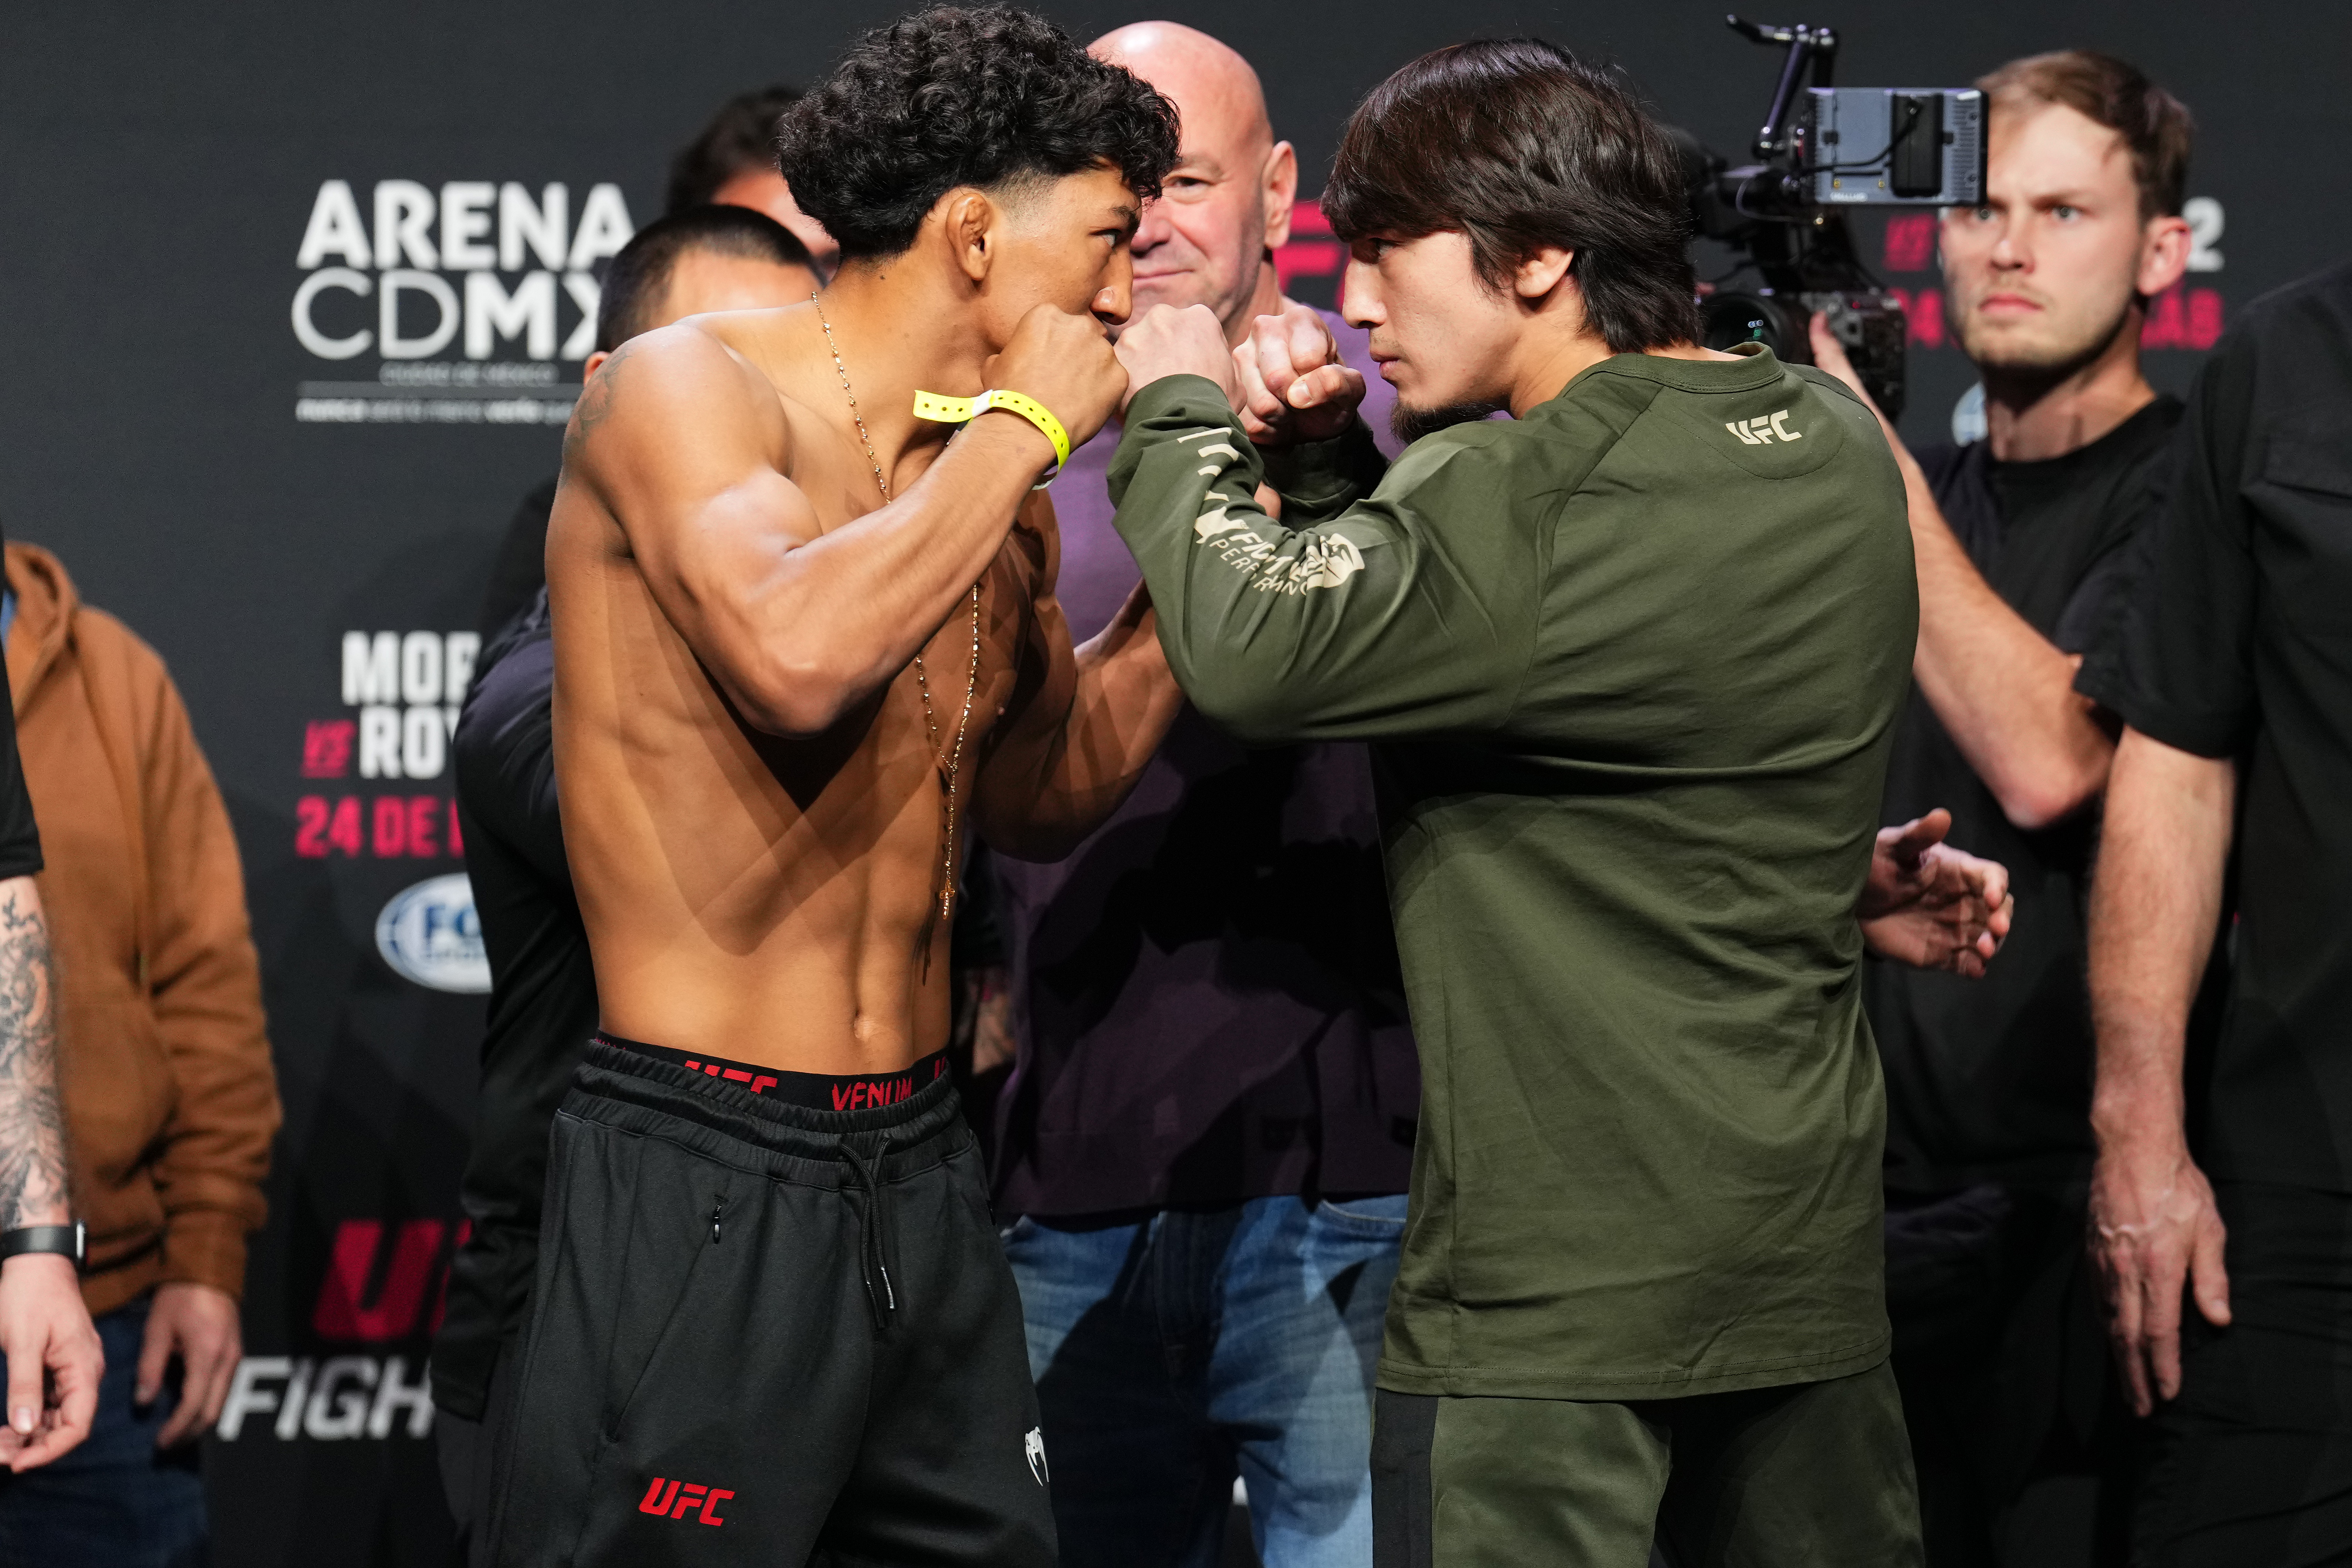 UFC Fight Night: Moreno vs Royval 2 Ceremonial Weigh-in